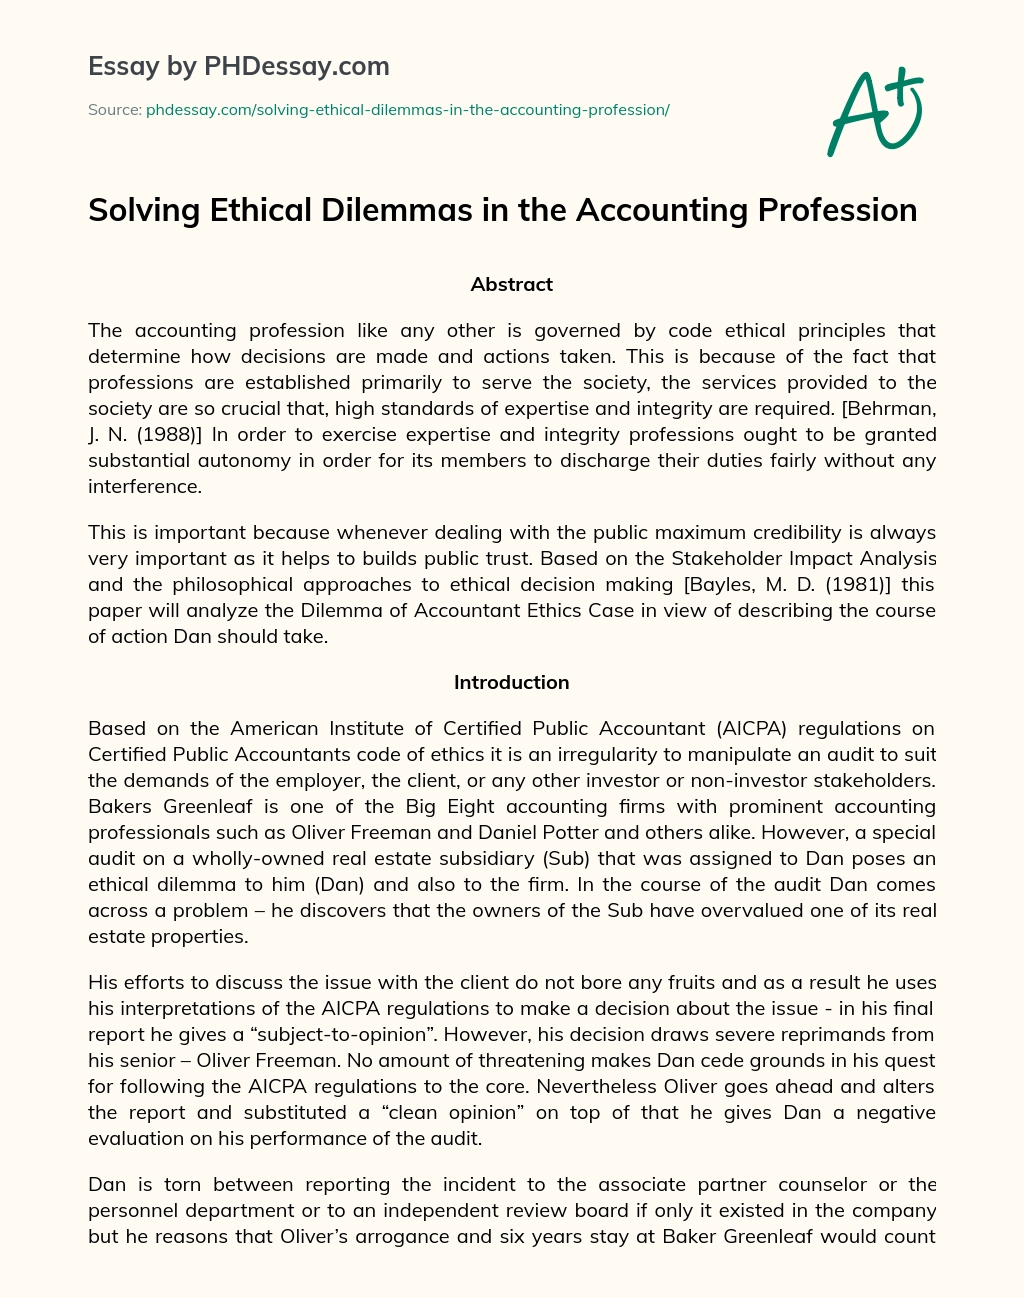 Solving Ethical Dilemmas in the Accounting Profession essay